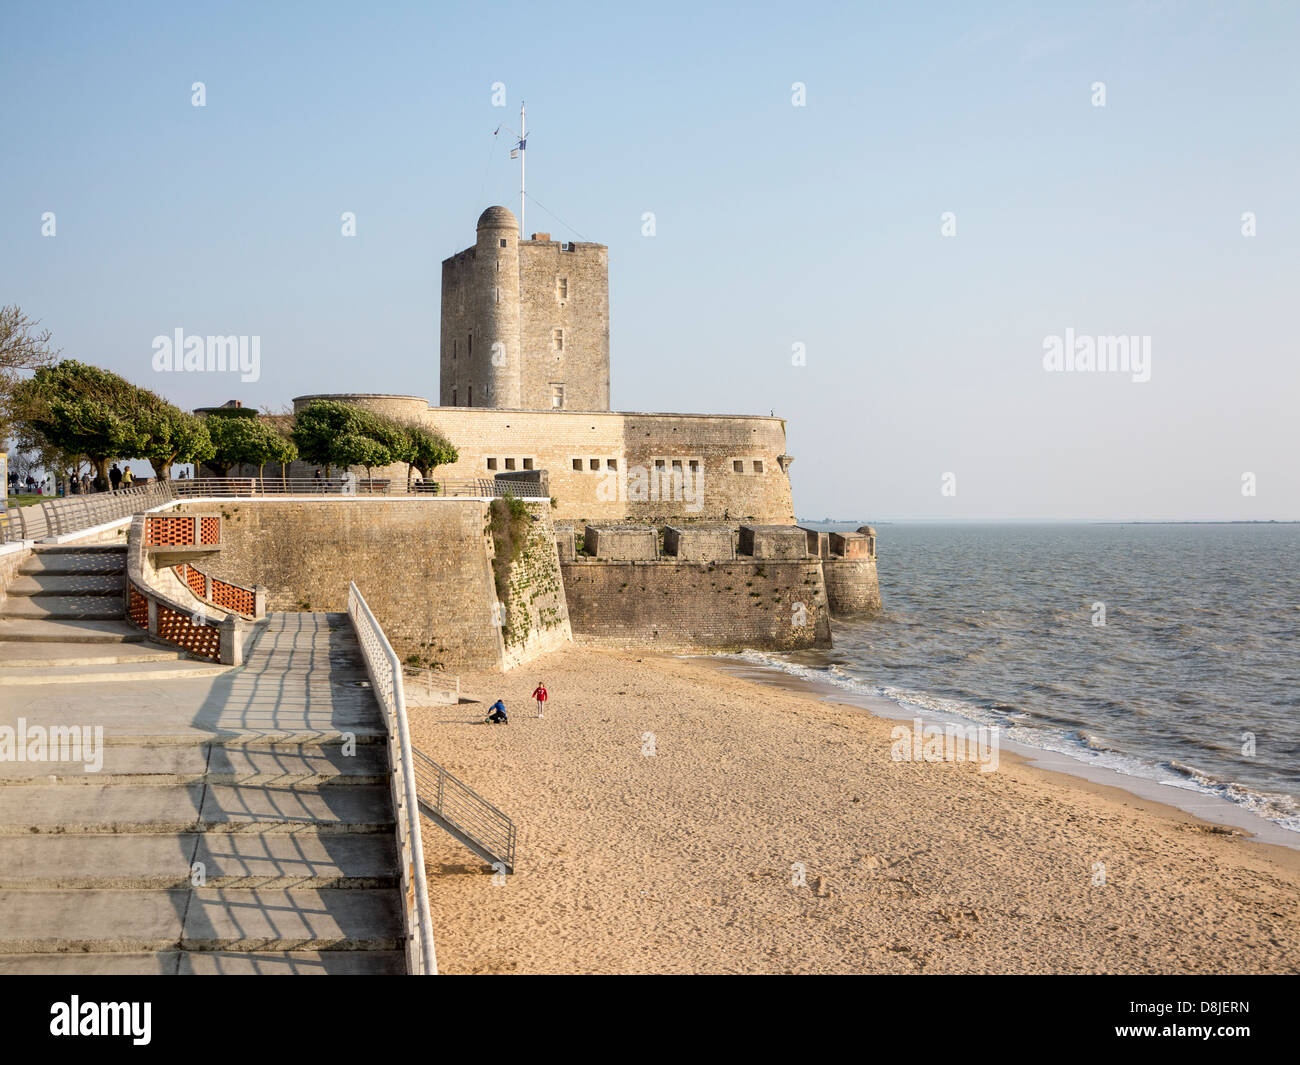 A view of the beach and the Fort Vauban in Fouras, France Stock Photo -  Alamy